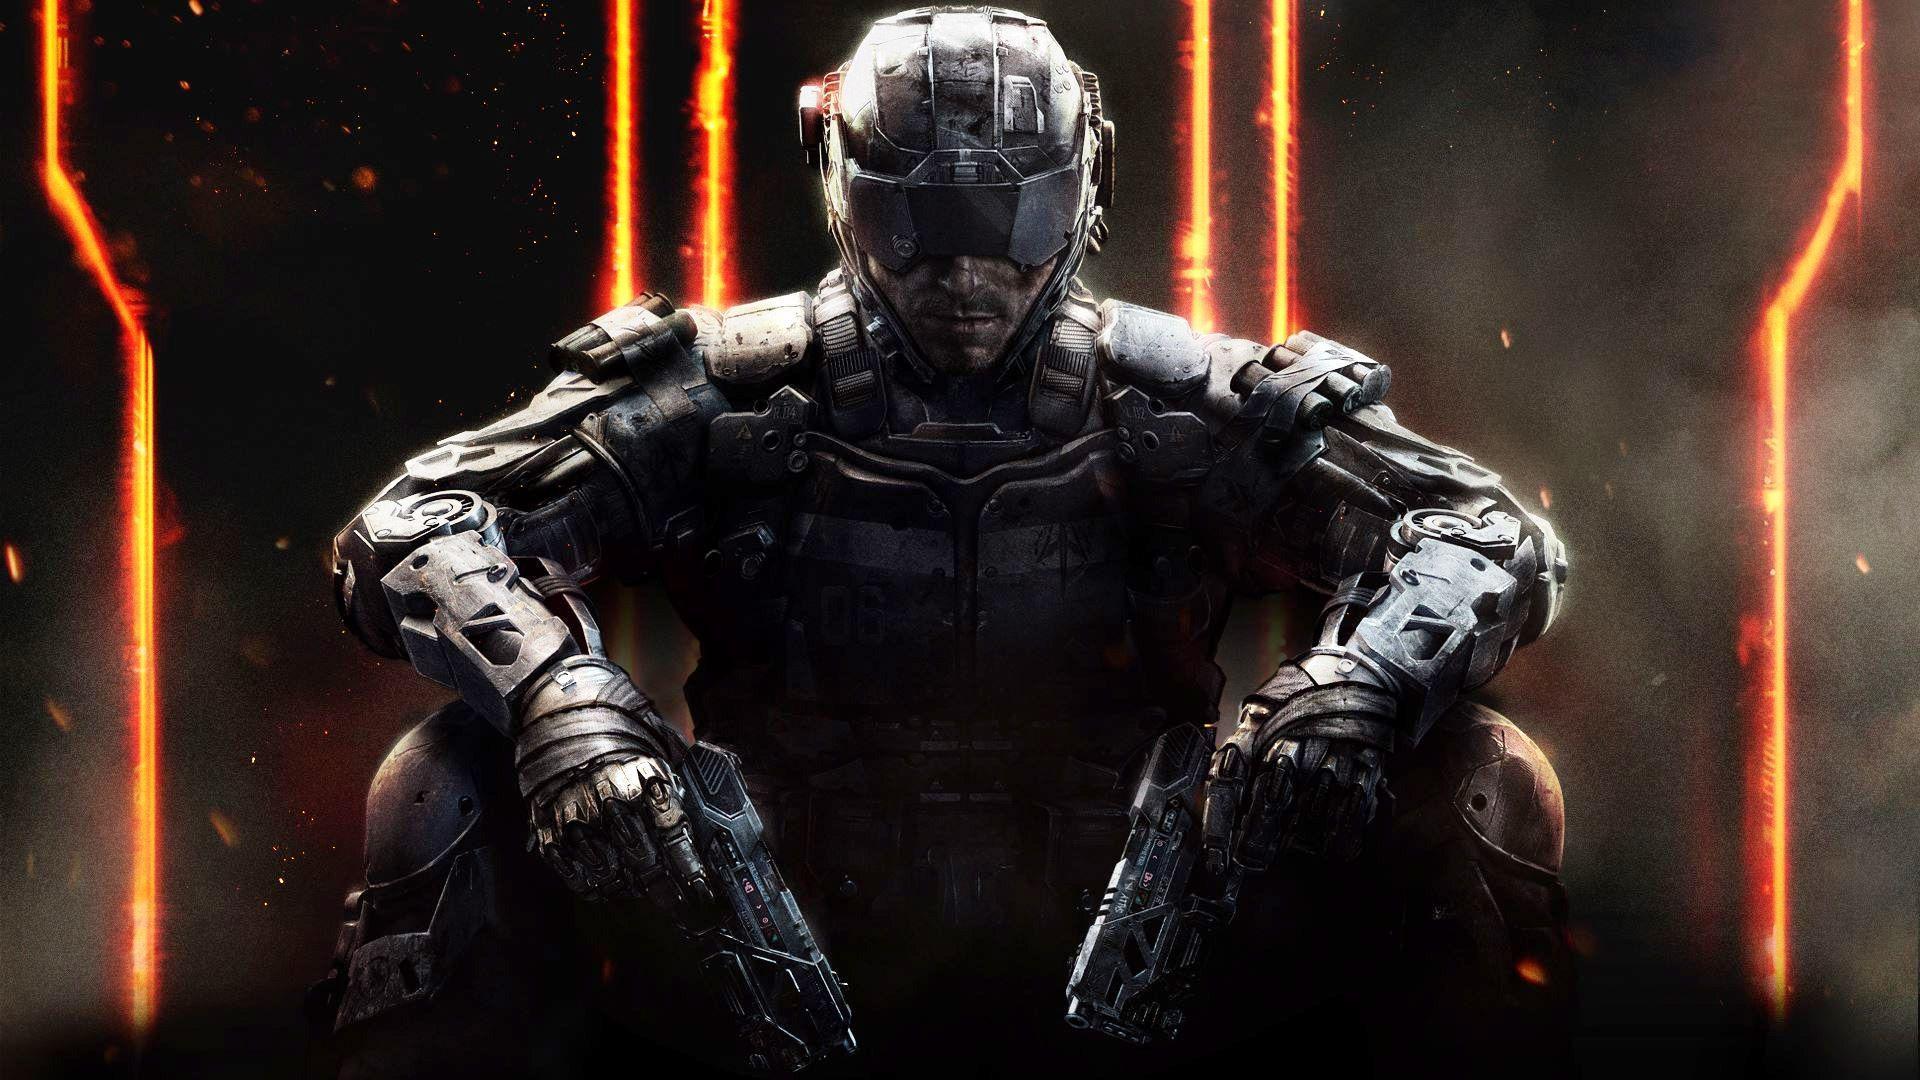 Call of Duty: Black Ops 3 Wallpaper for 1920×1080 HD Resolution